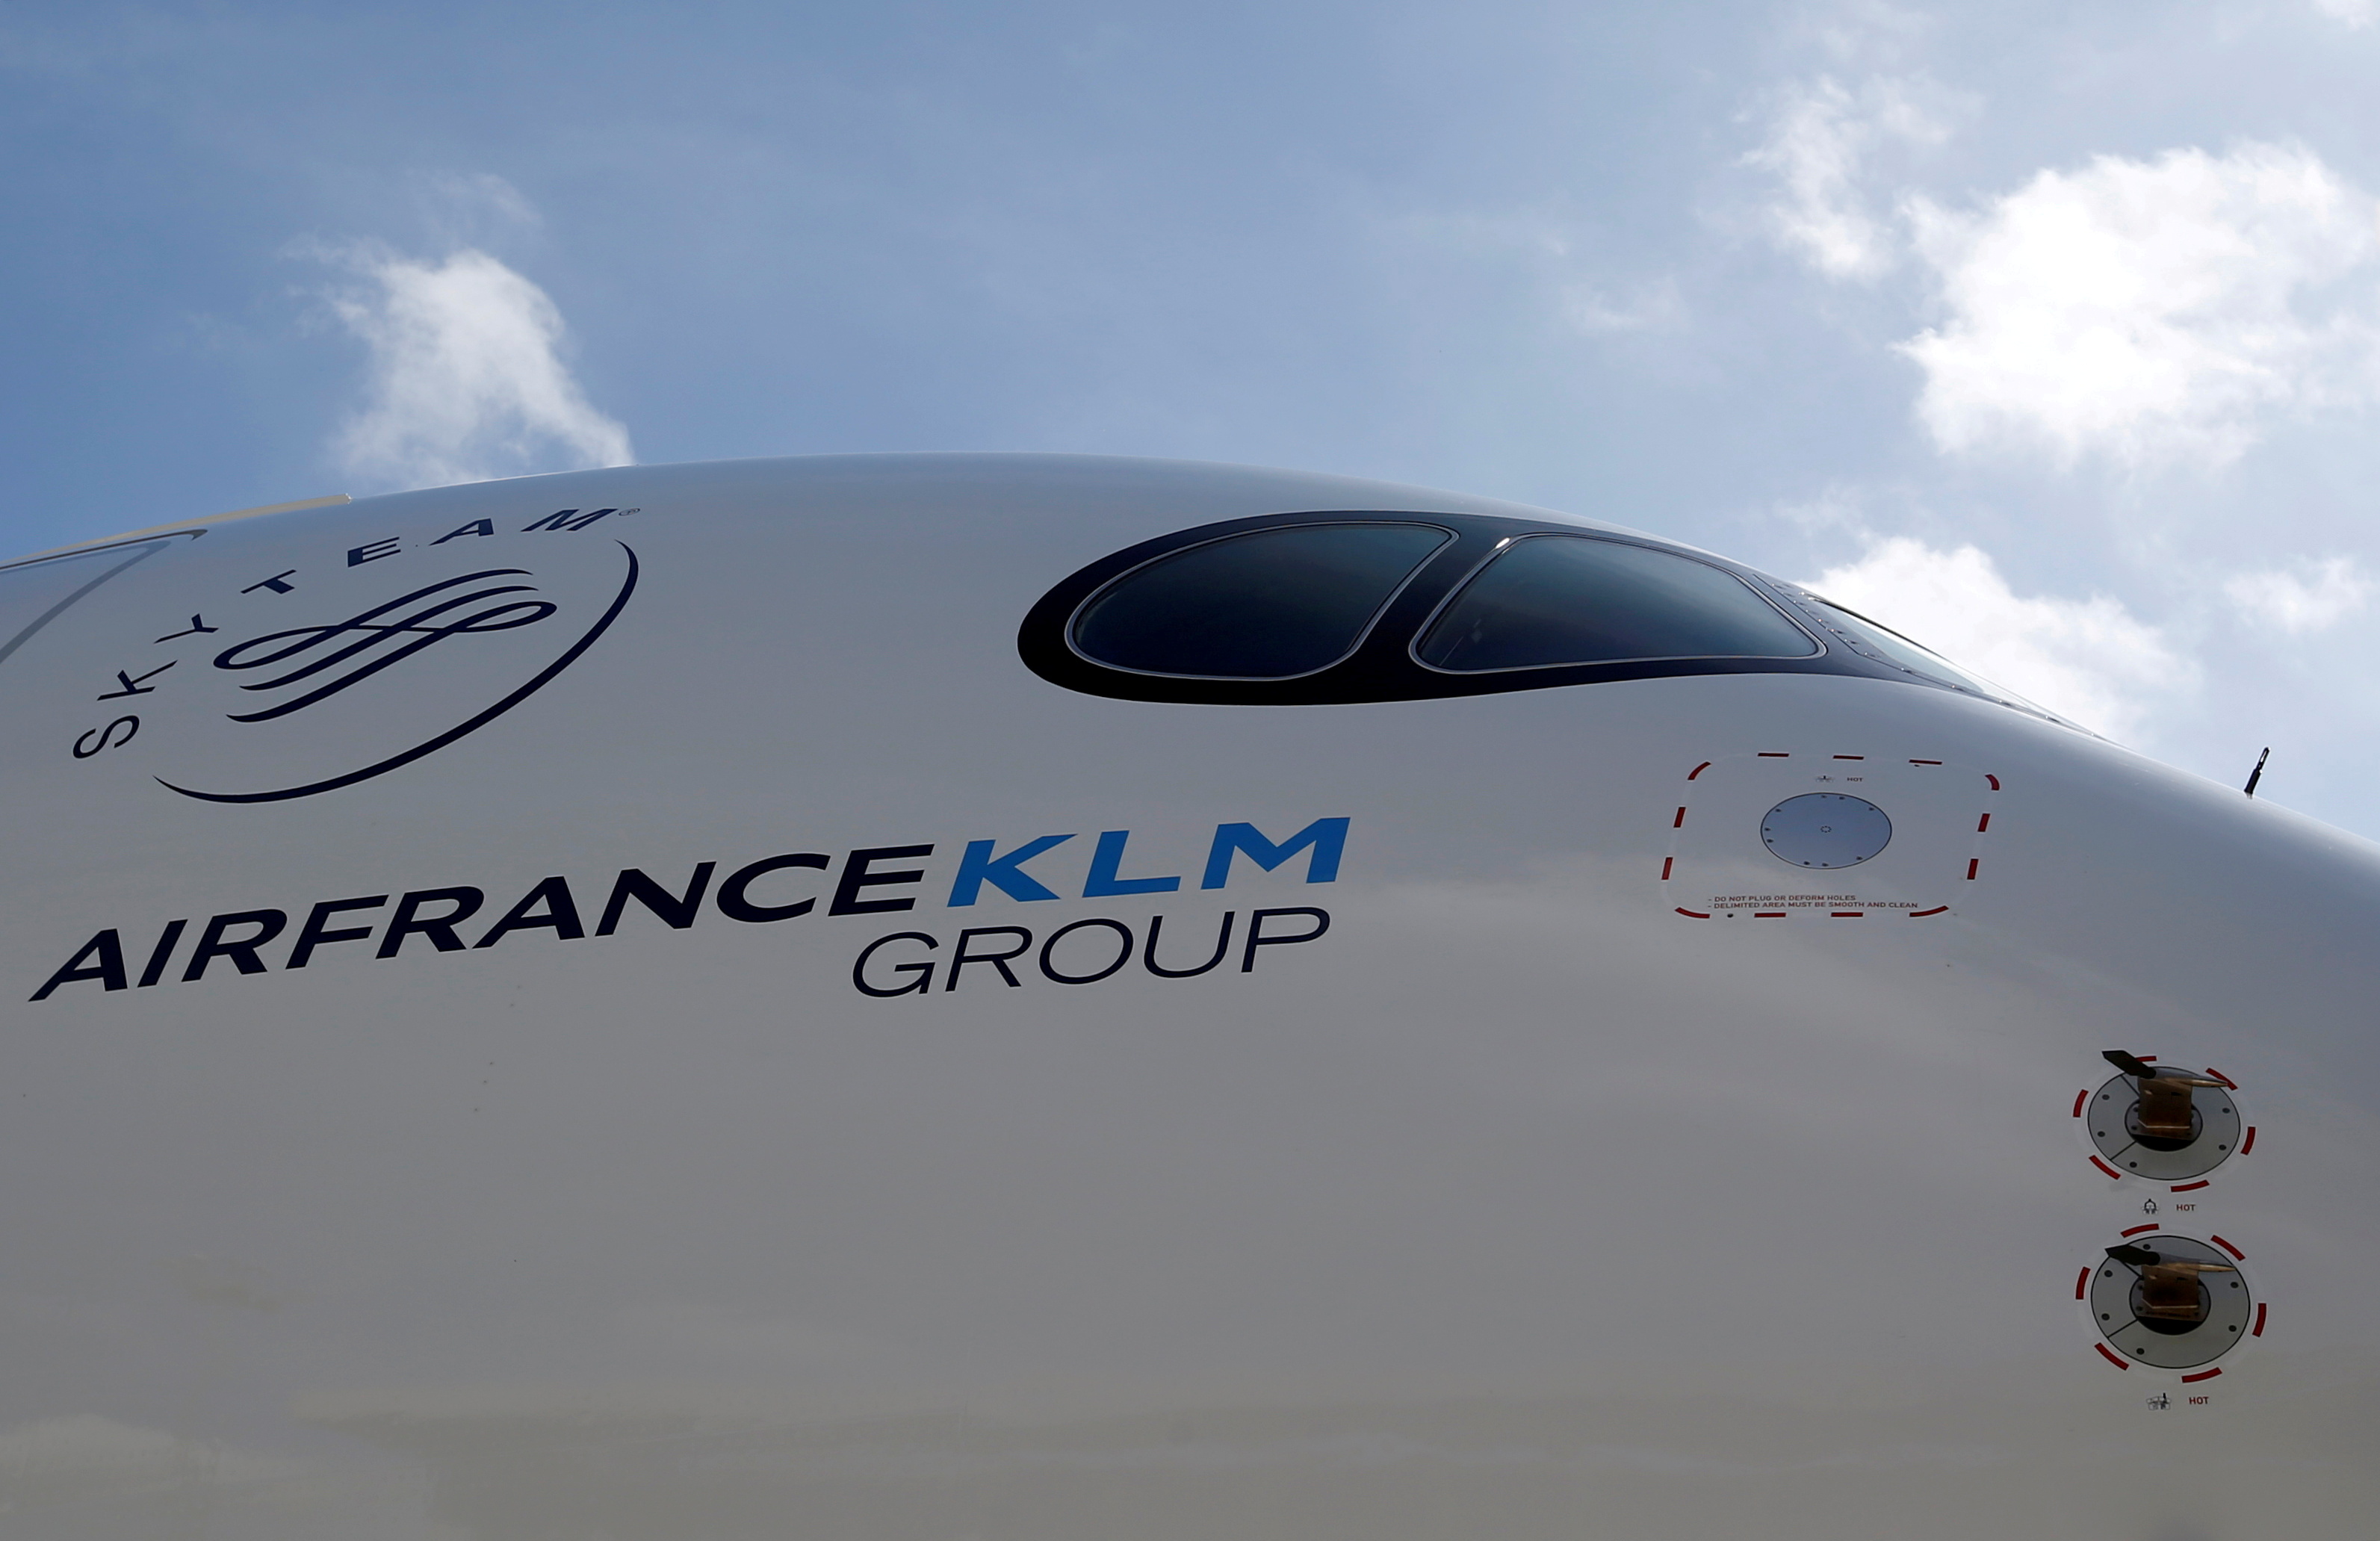 Logo of Air France KLM Group is pictured on the first Air France airliner's Airbus A350 during a ceremony at the aircraft builder's headquarters of Airbus in Colomiers near Toulouse, France, September 27, 2019. REUTERS/Regis Duvignau/File Photo